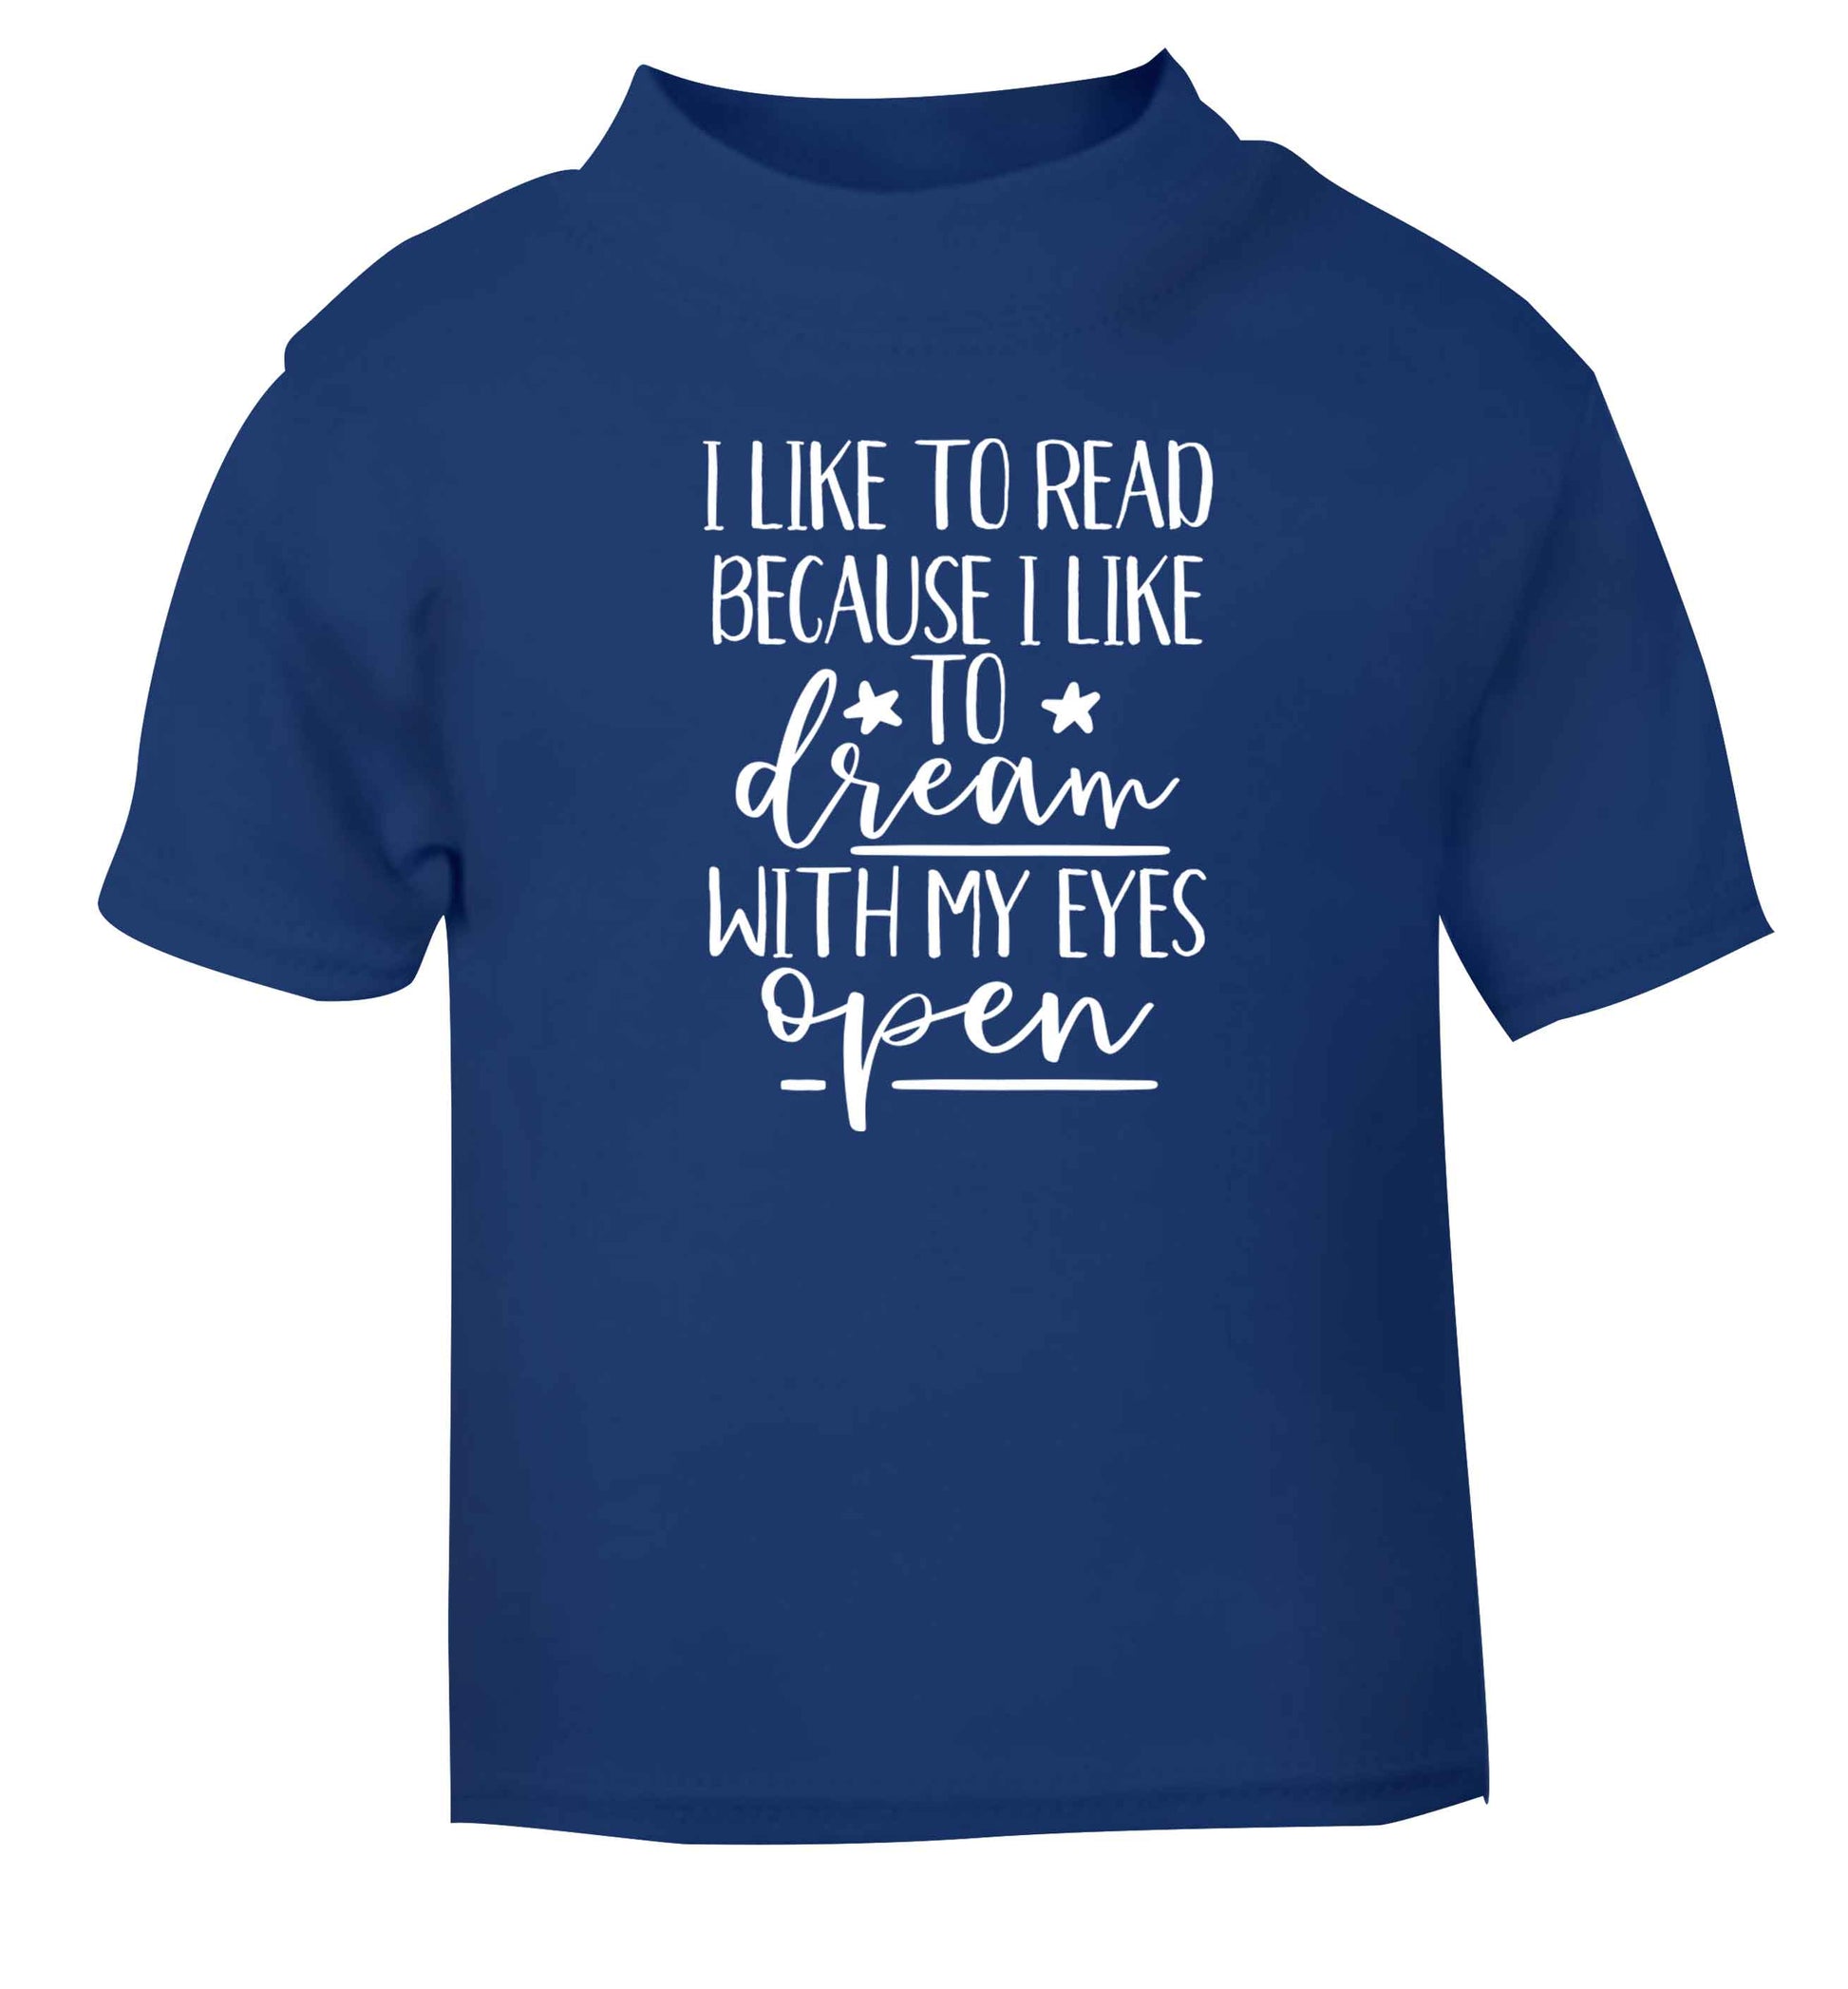 I like to read because I like to dream with my eyes open blue Baby Toddler Tshirt 2 Years